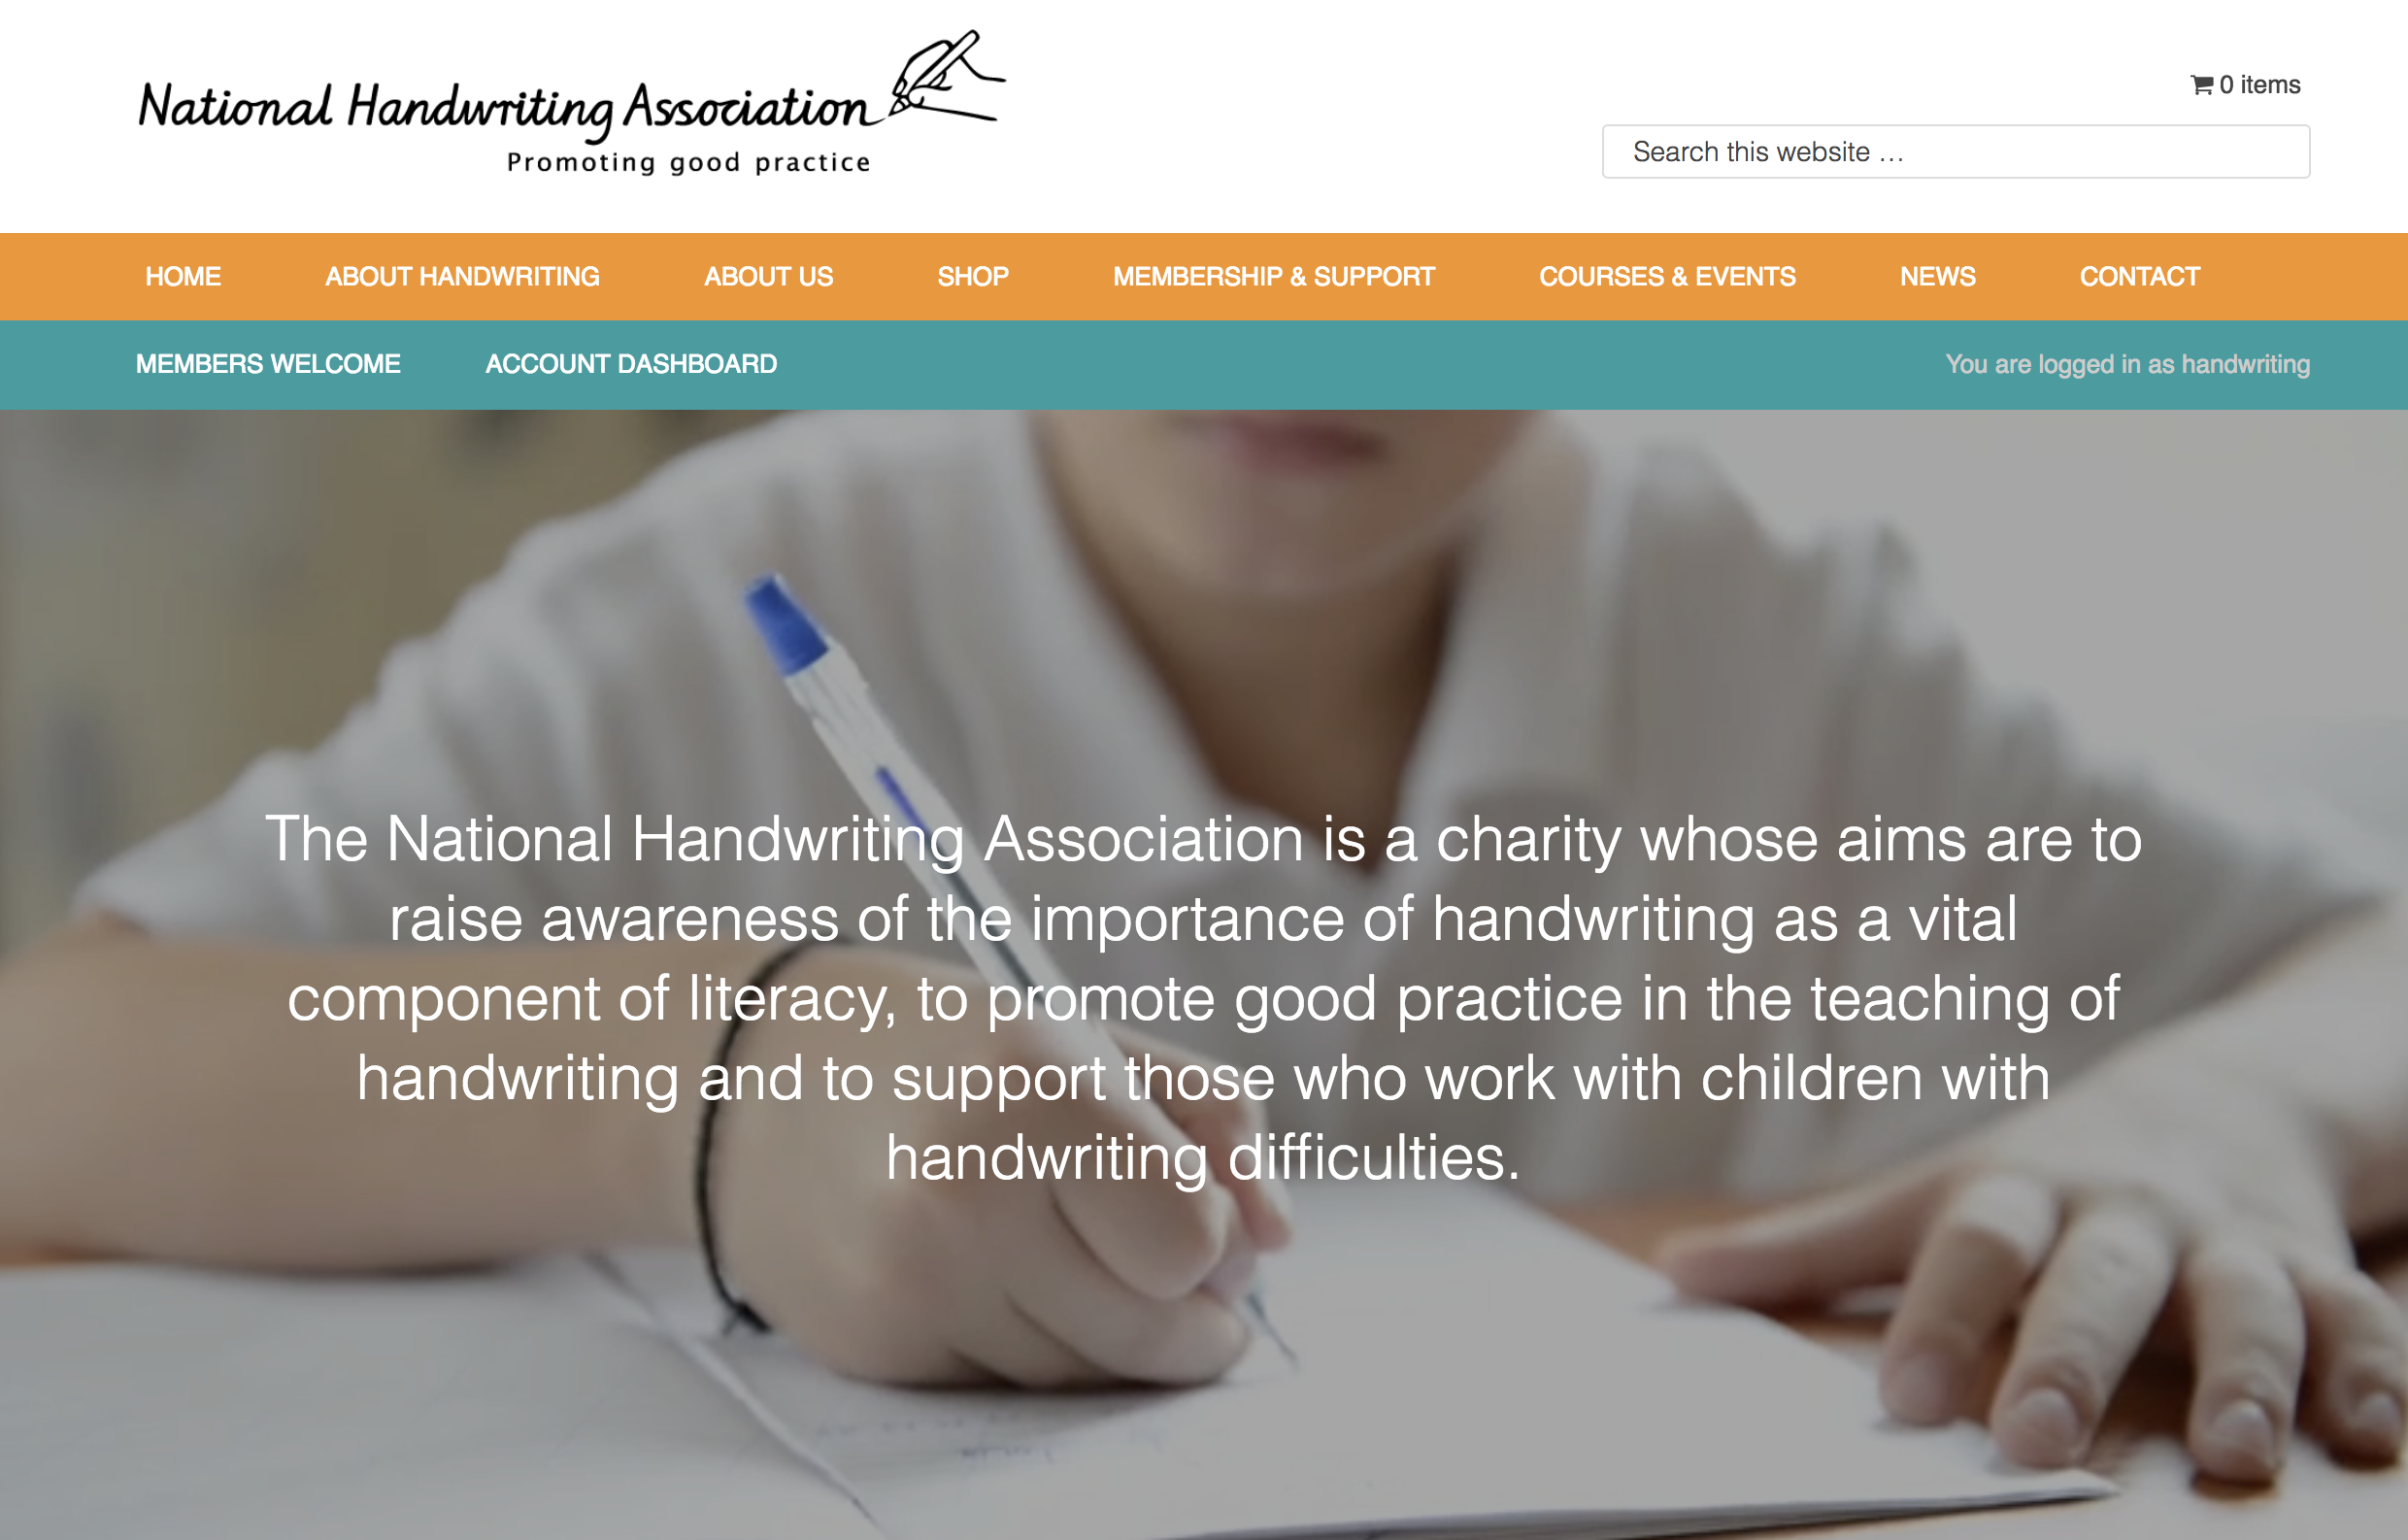 Link to National Handwriting Association